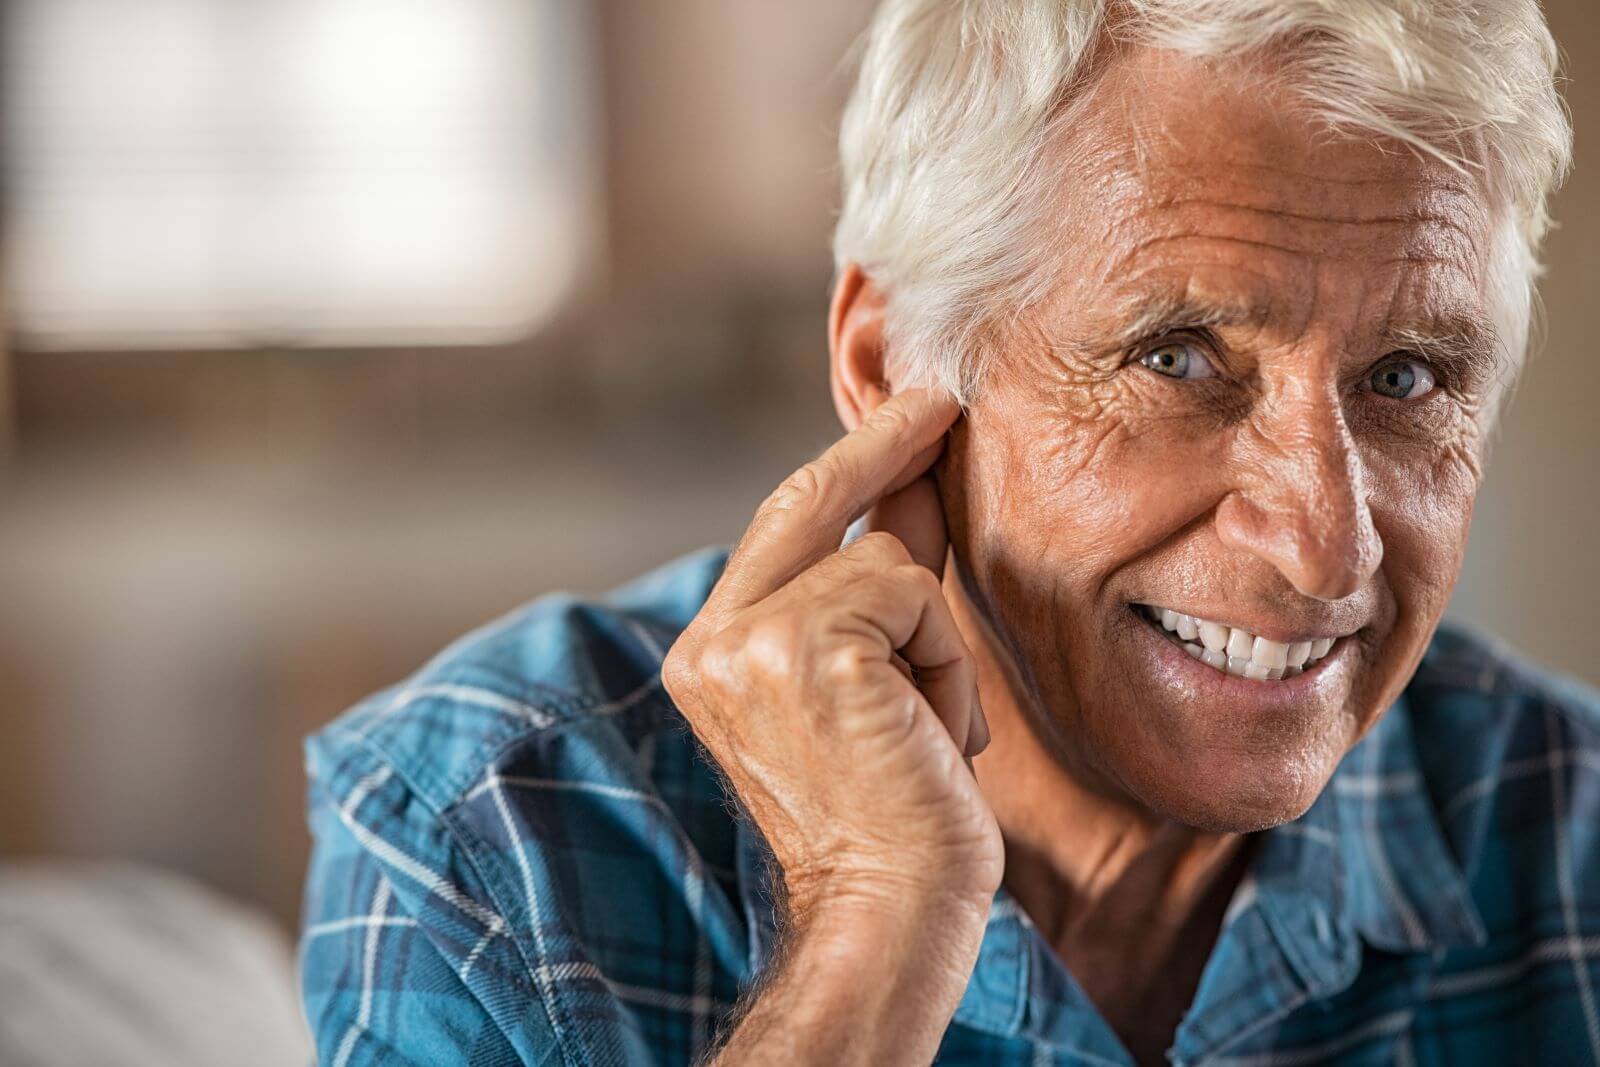 Senior man with hearing trouble holding his fingers to his ear